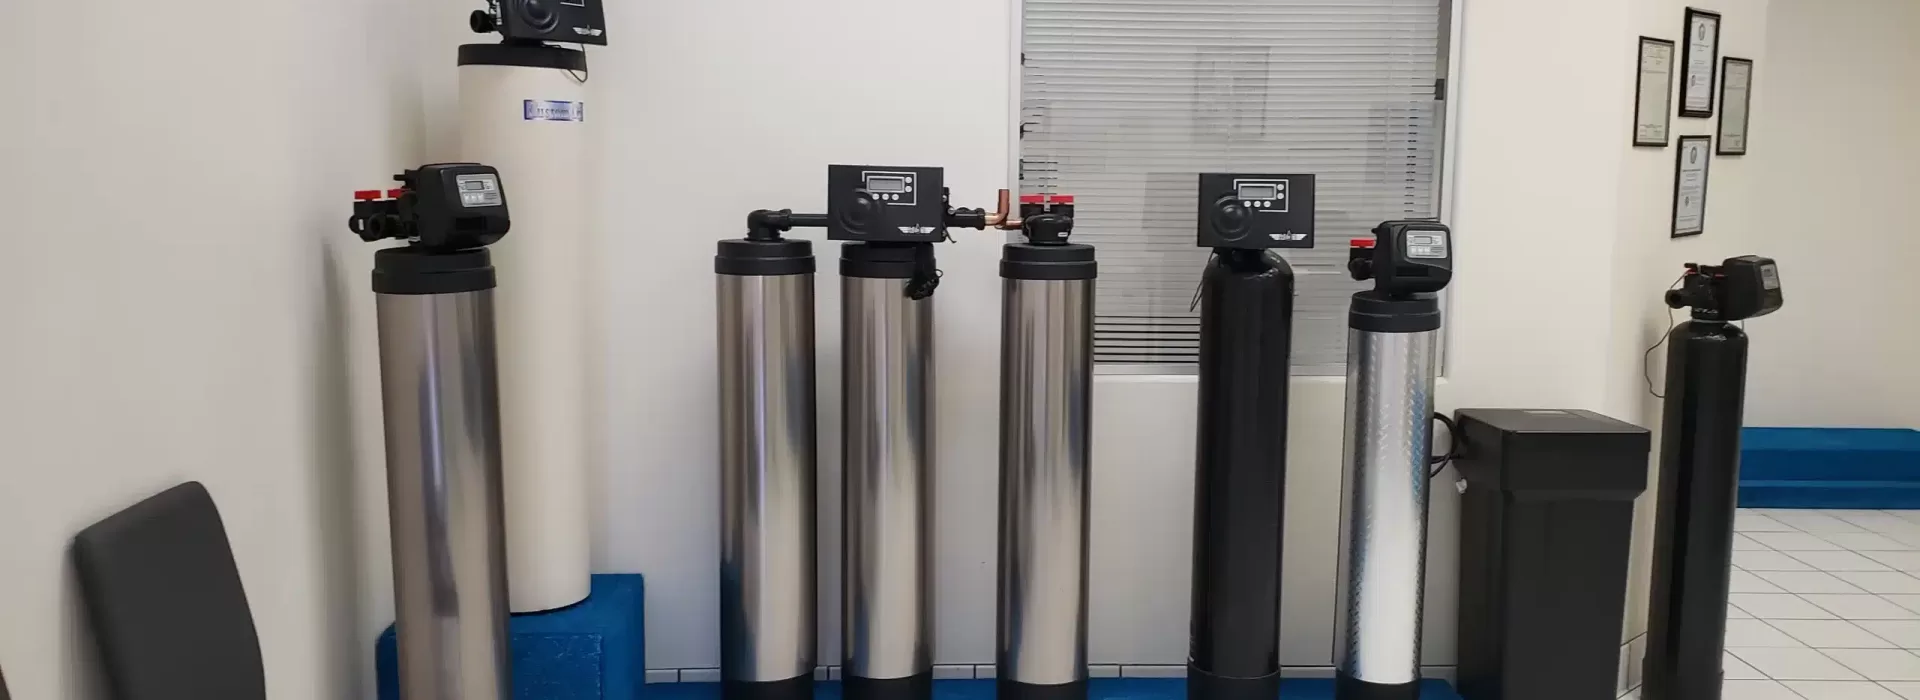 Water Softening And Treatment - Tech And How-To